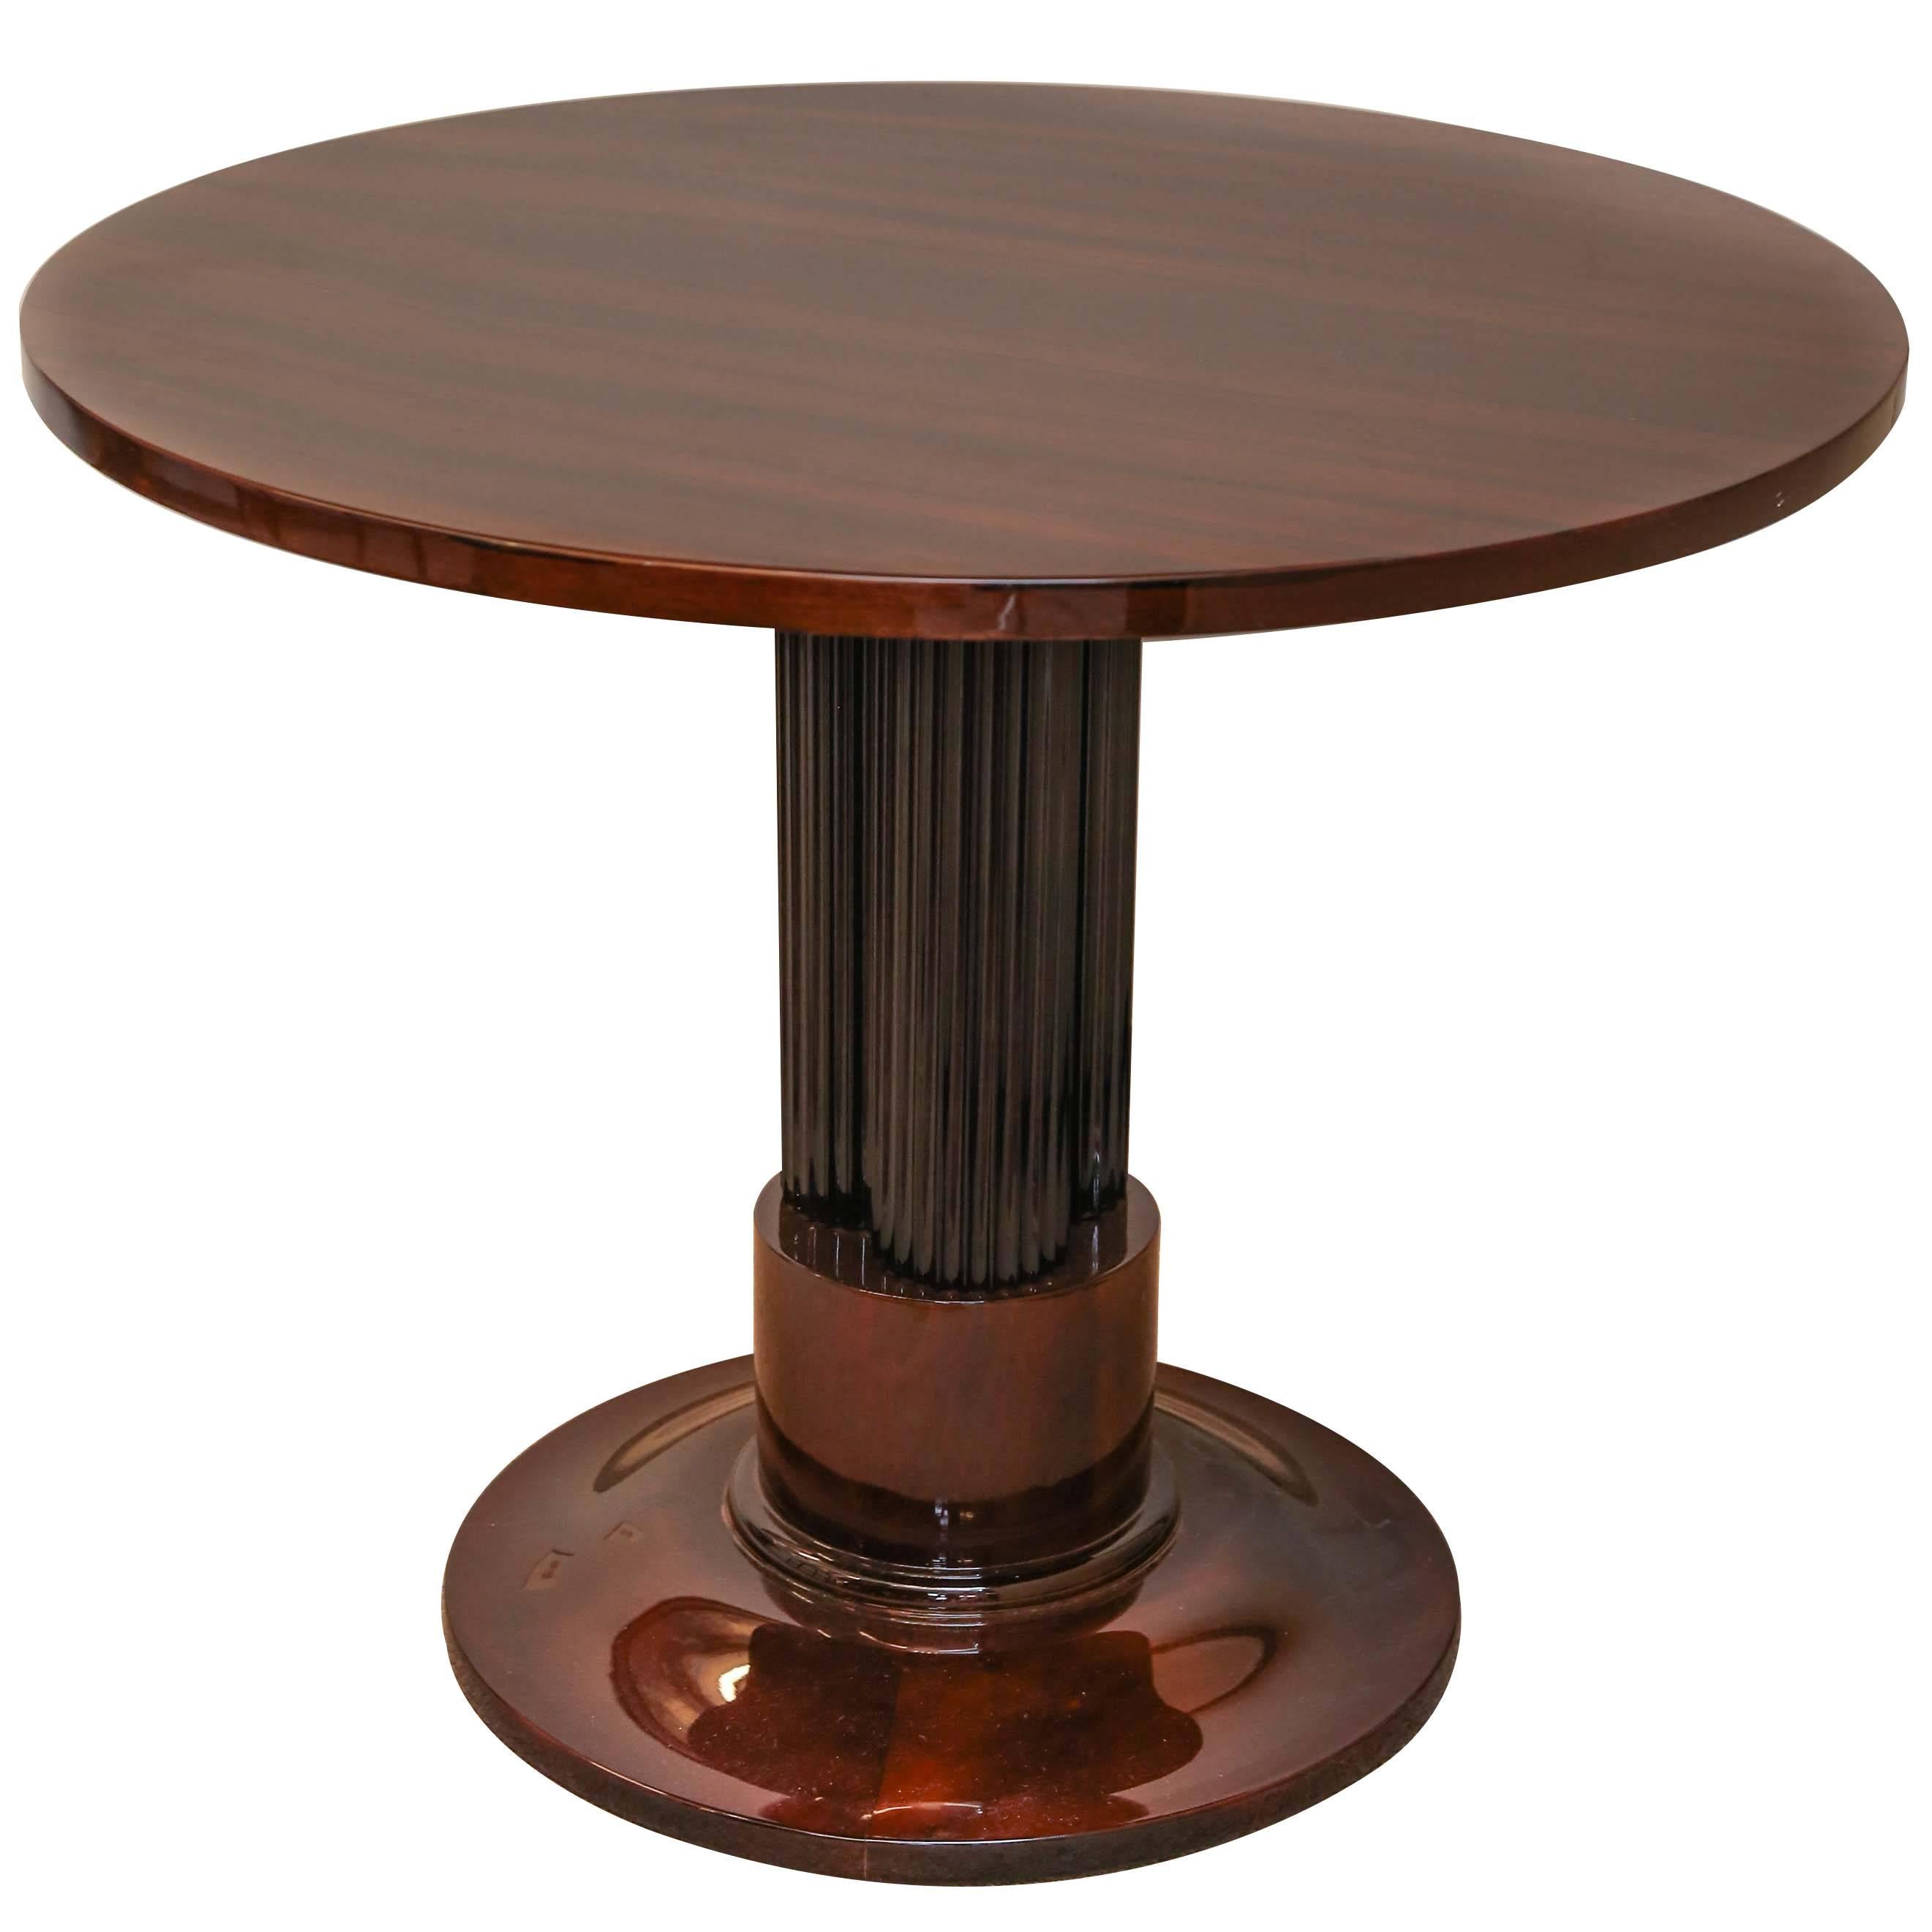  French Art Deco Rosewood Veneer and Ebonized Wood Side Table